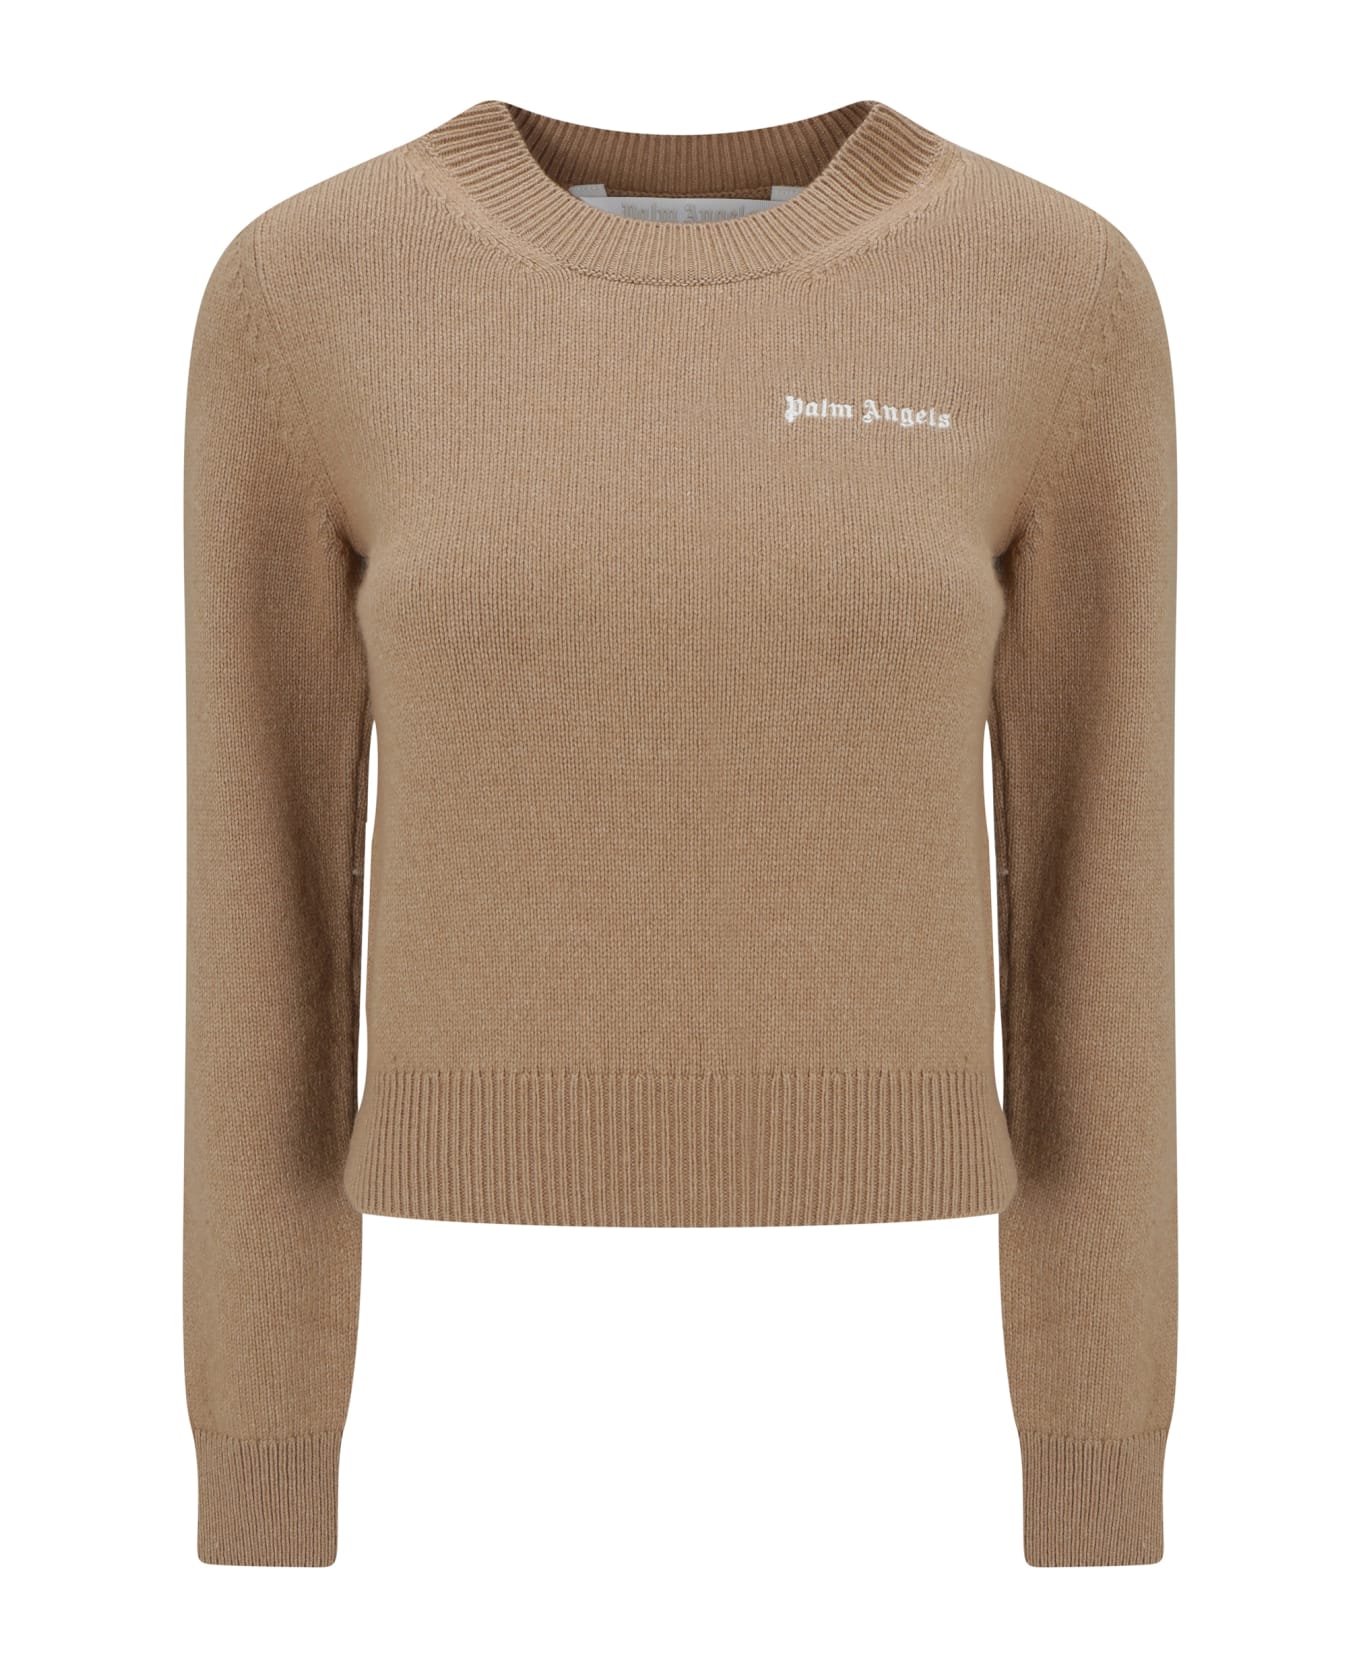 Palm Angels Classic Logo Sweater - Camel Off